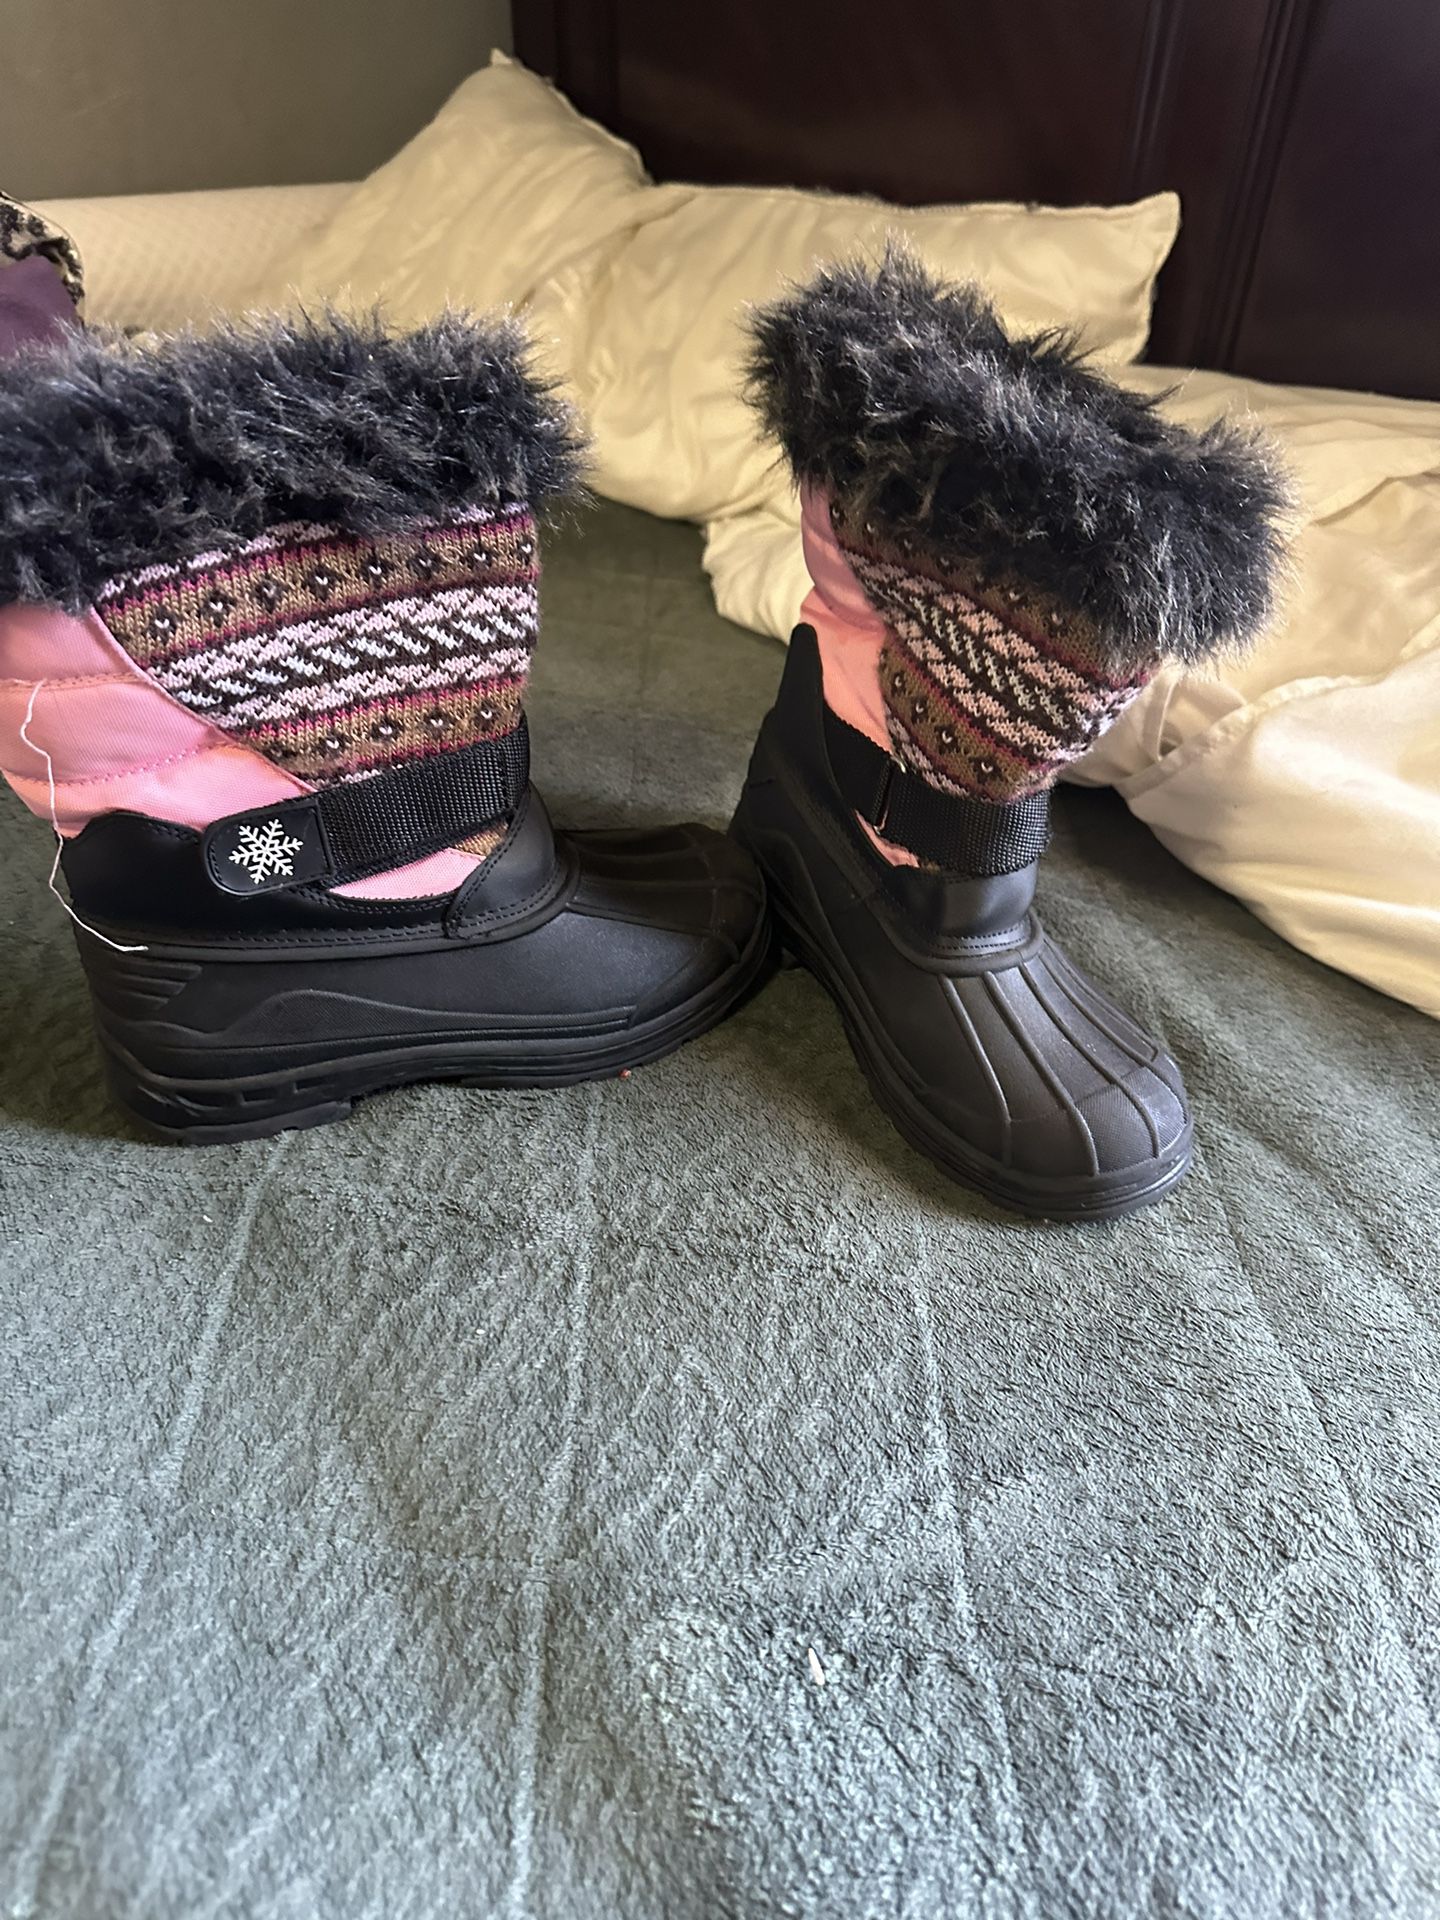 Snow boots and Good Condition Size 3 